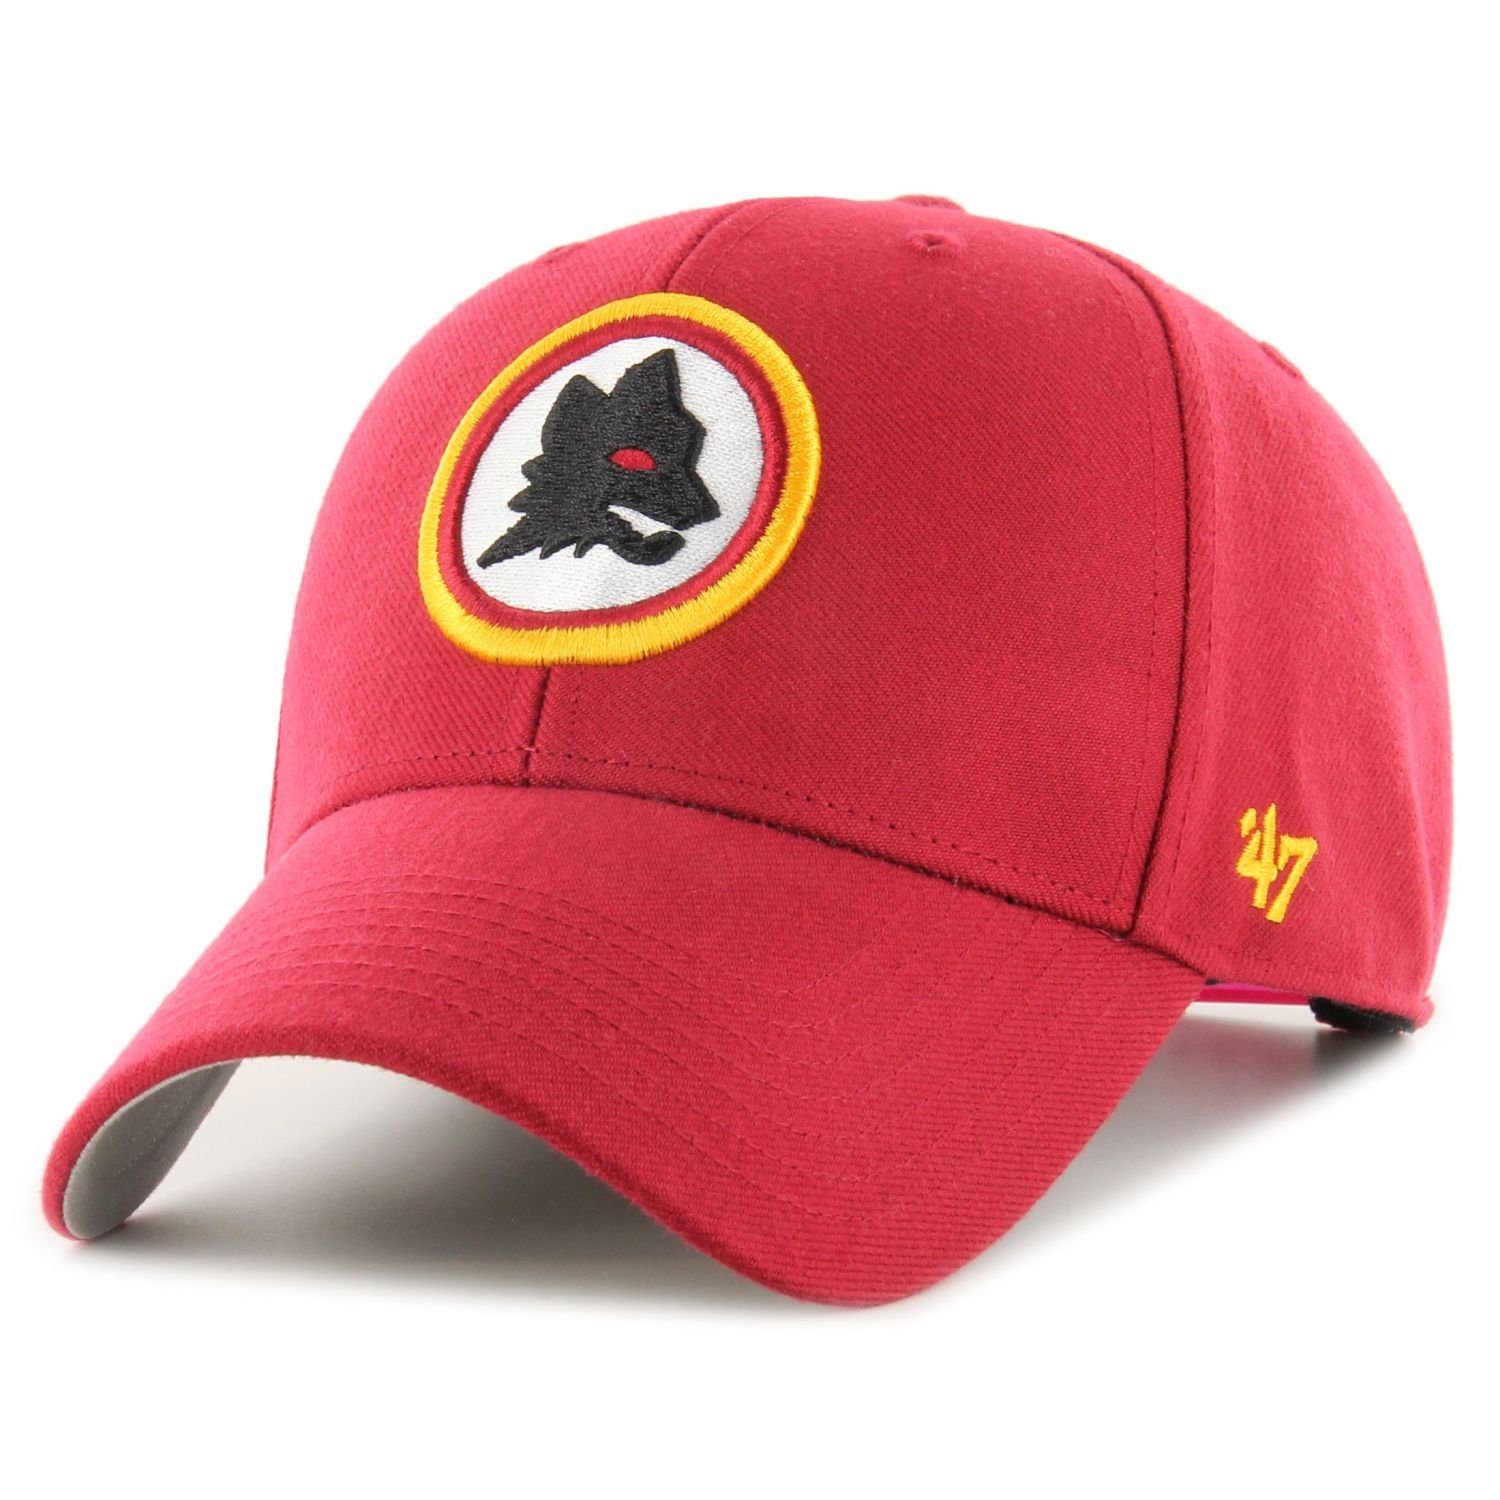 '47 Brand Baseball Cap Relaxed Fit SURE SHOT AS Roma